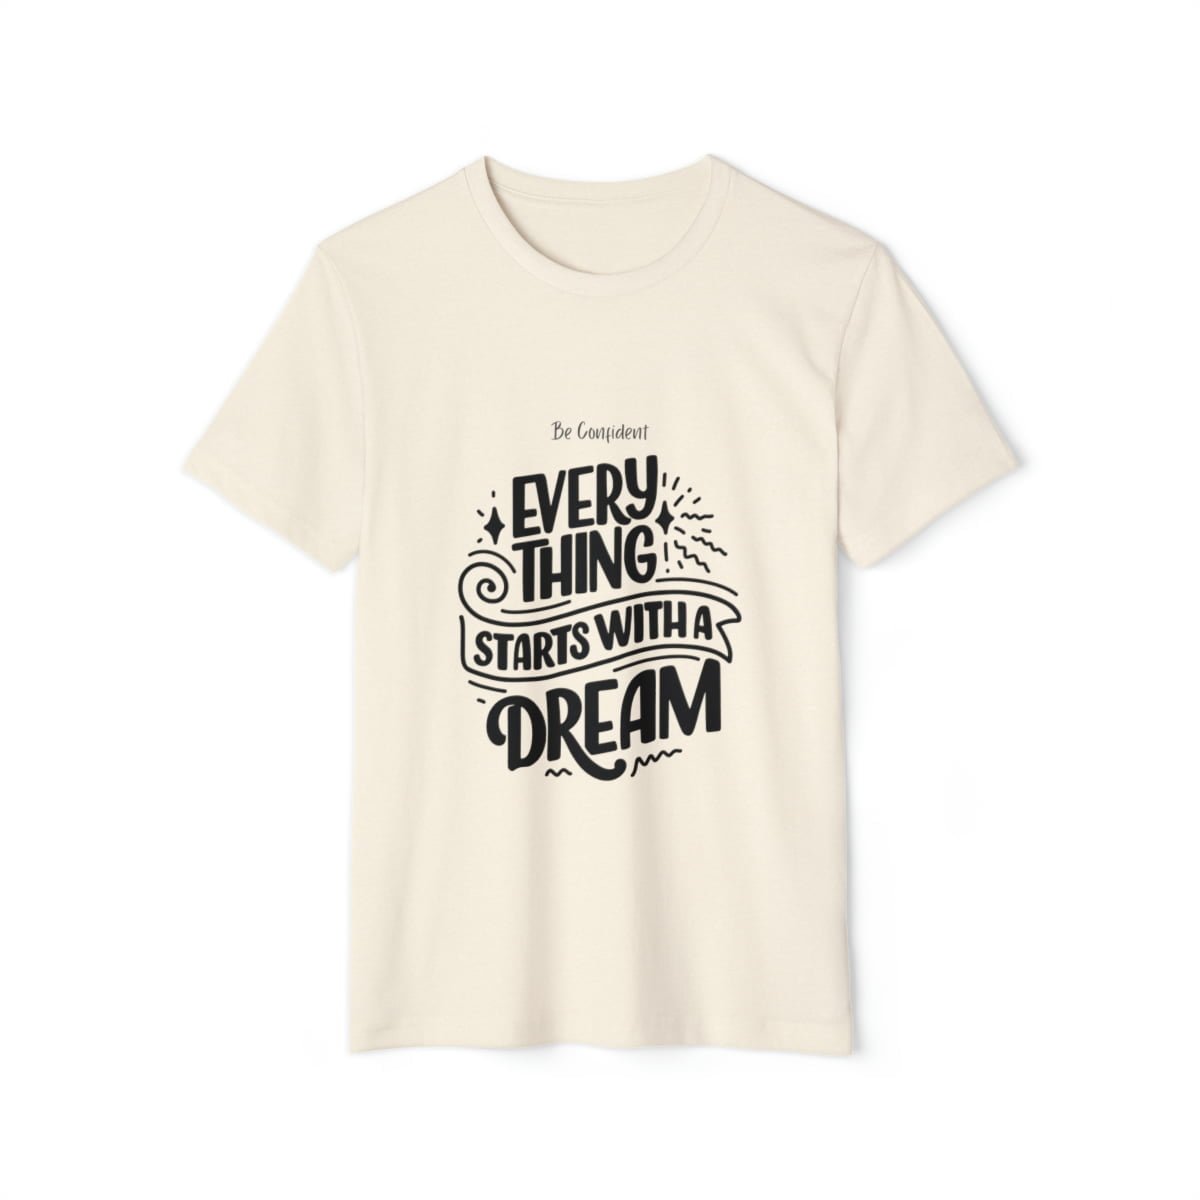 - Possitive Quotes T-shirt 015 - Unisex Recycled Organic T-Shirt - NoowAI Shop